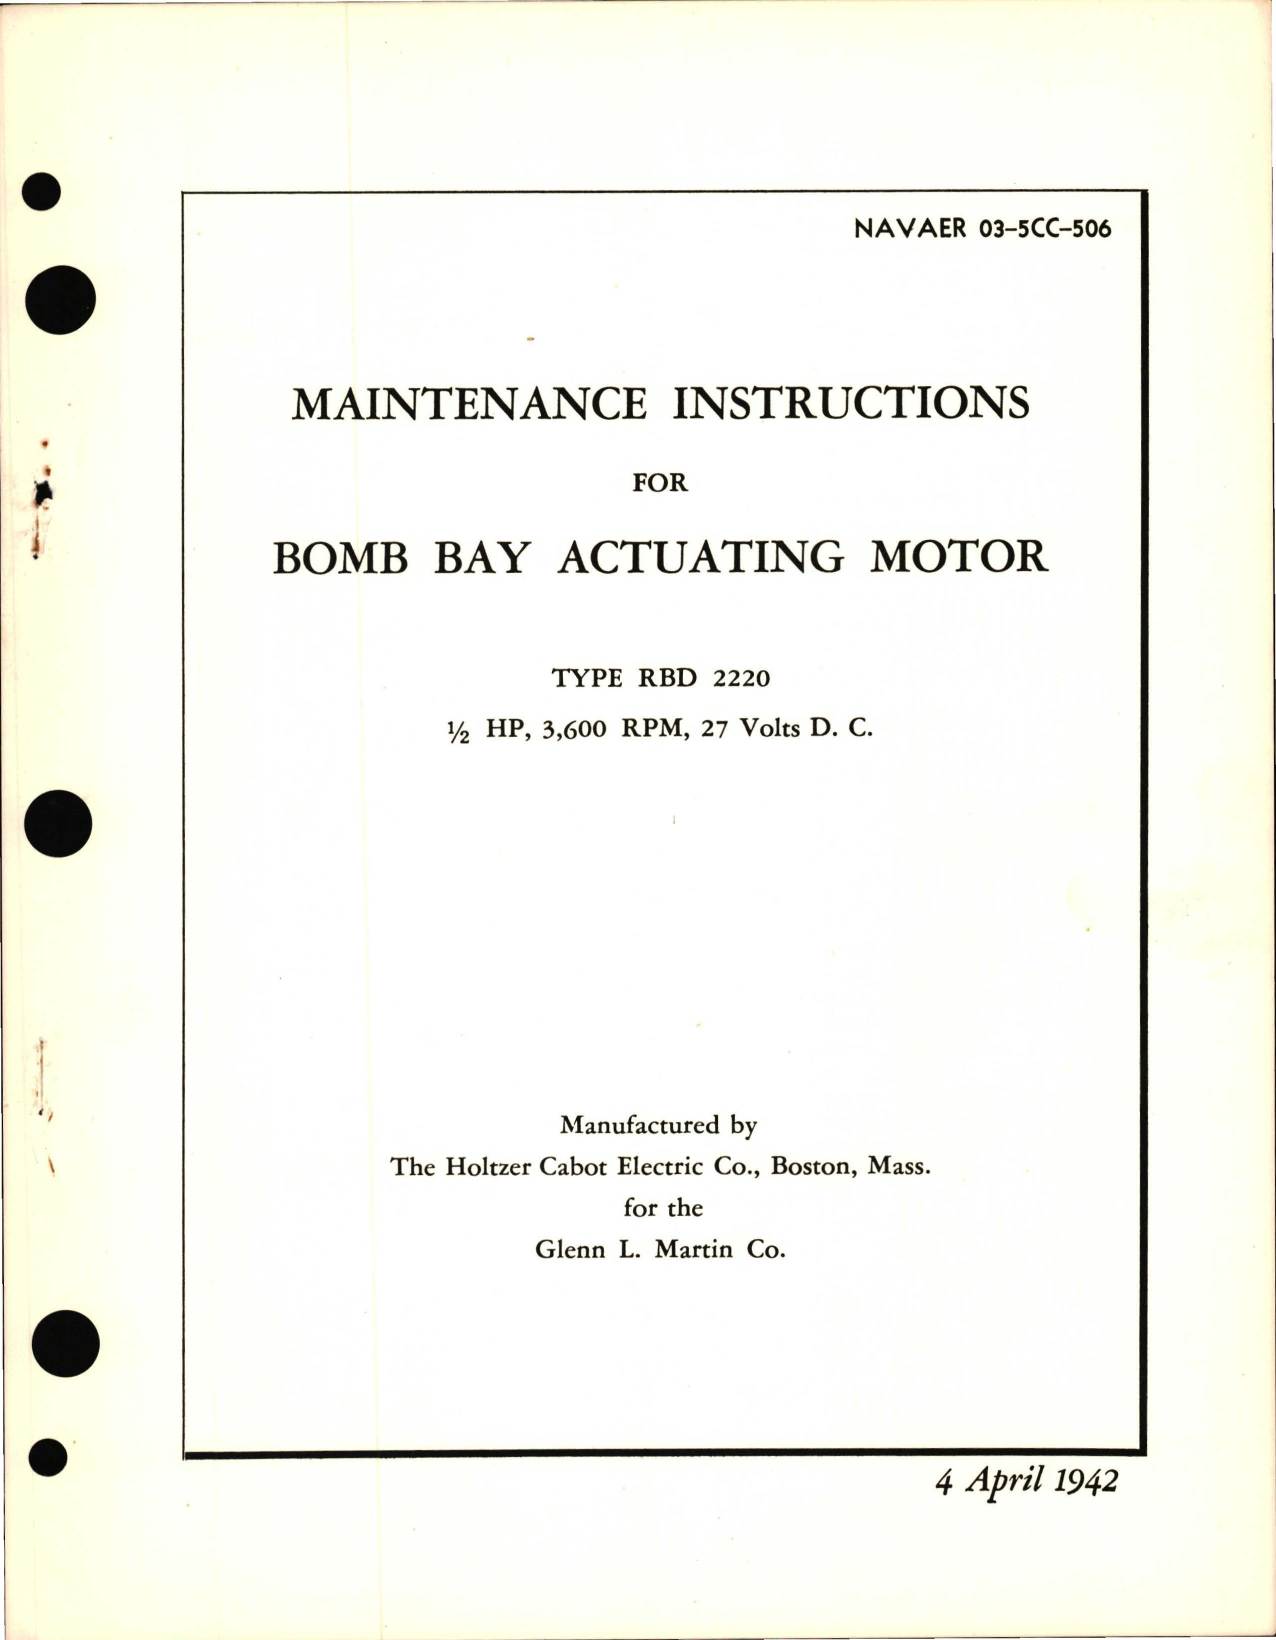 Sample page 1 from AirCorps Library document: Maintenance Instructions for Bomb Bay Actuating Motor Type RBD 2220 